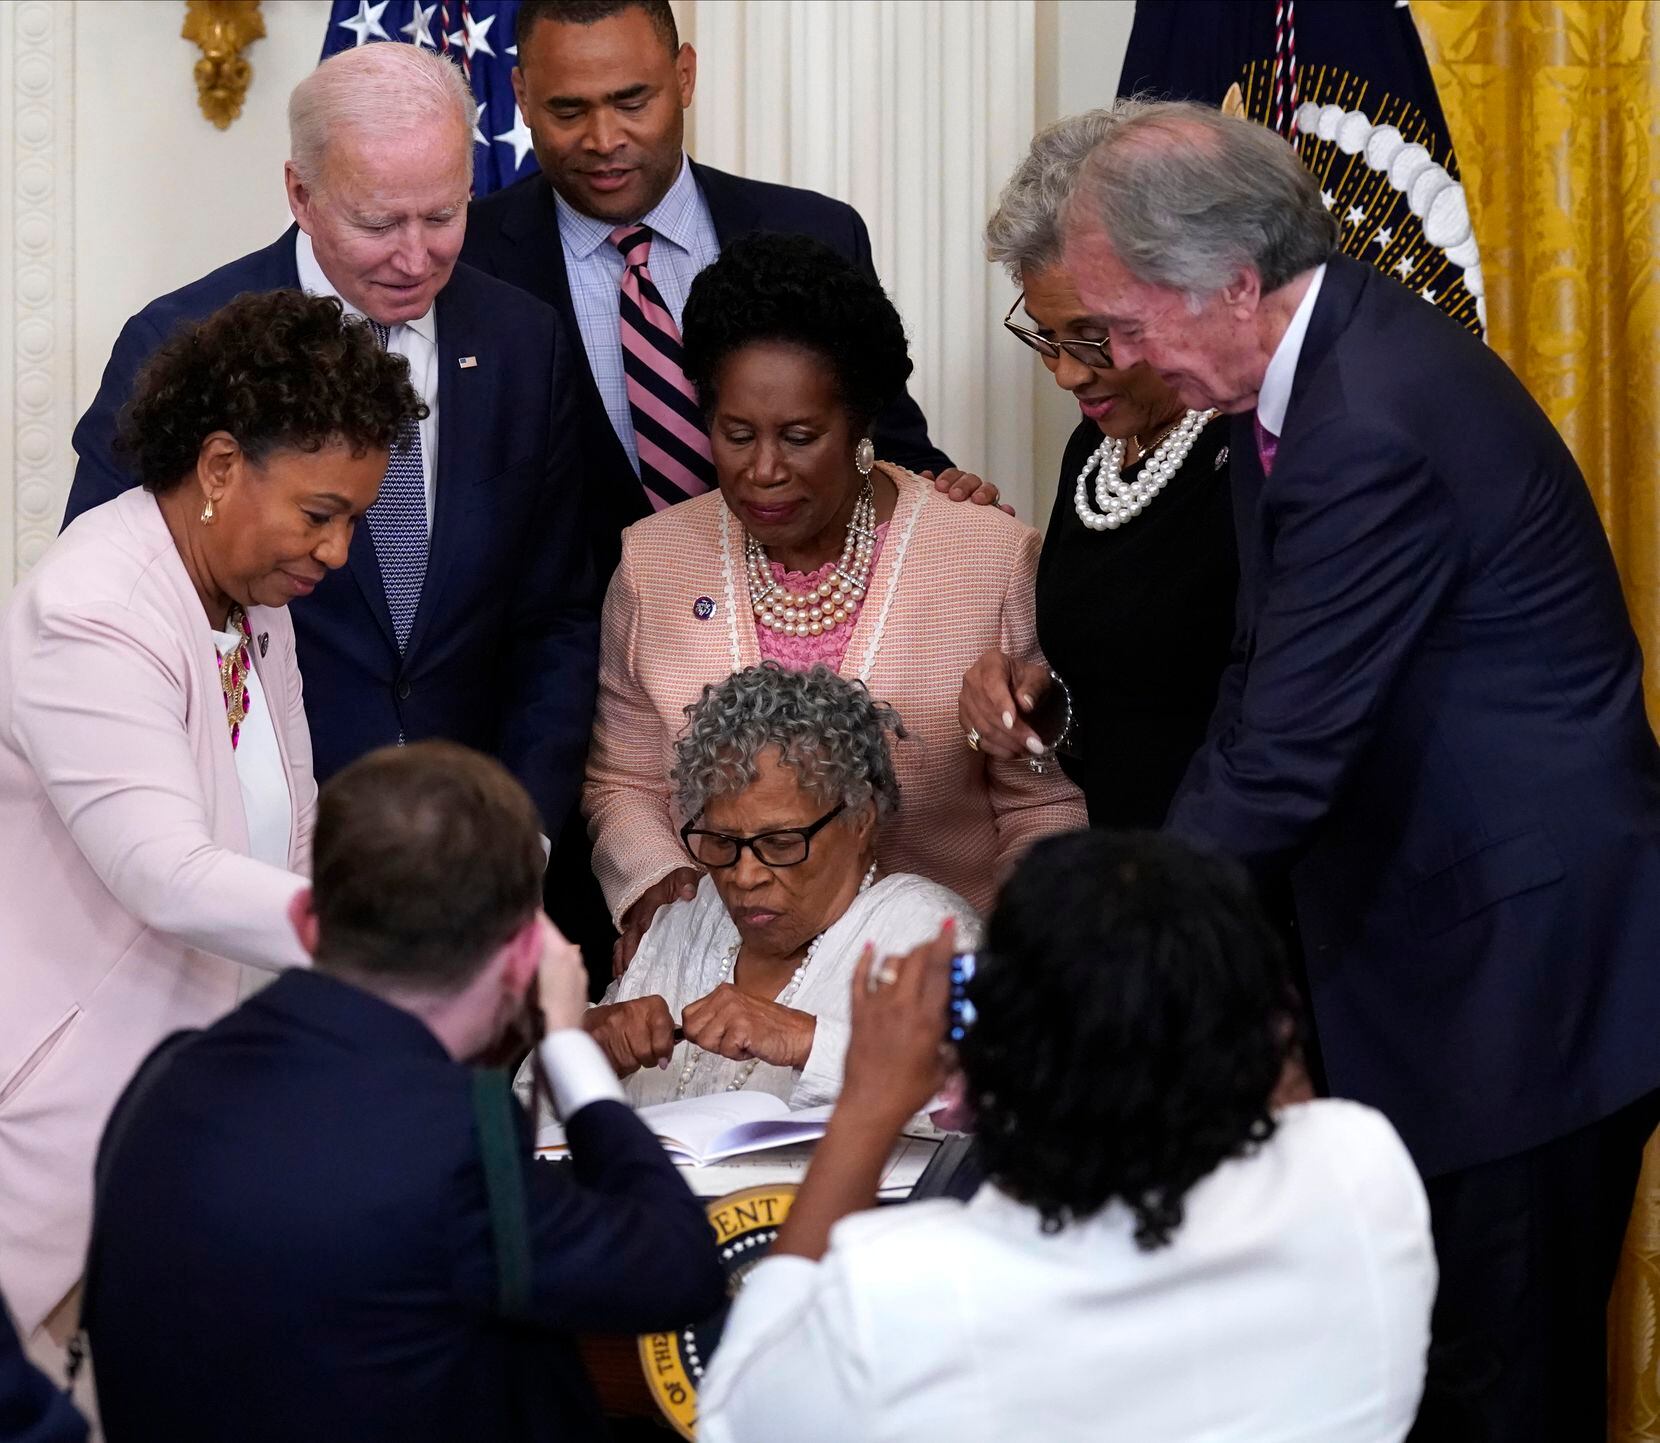 People take photos as Opal Lee holds a pen and is seated where President Joe Biden signed the Juneteenth National Independence Day Act, in the East Room of the White House, Thursday, June 17, 2021, in Washington.